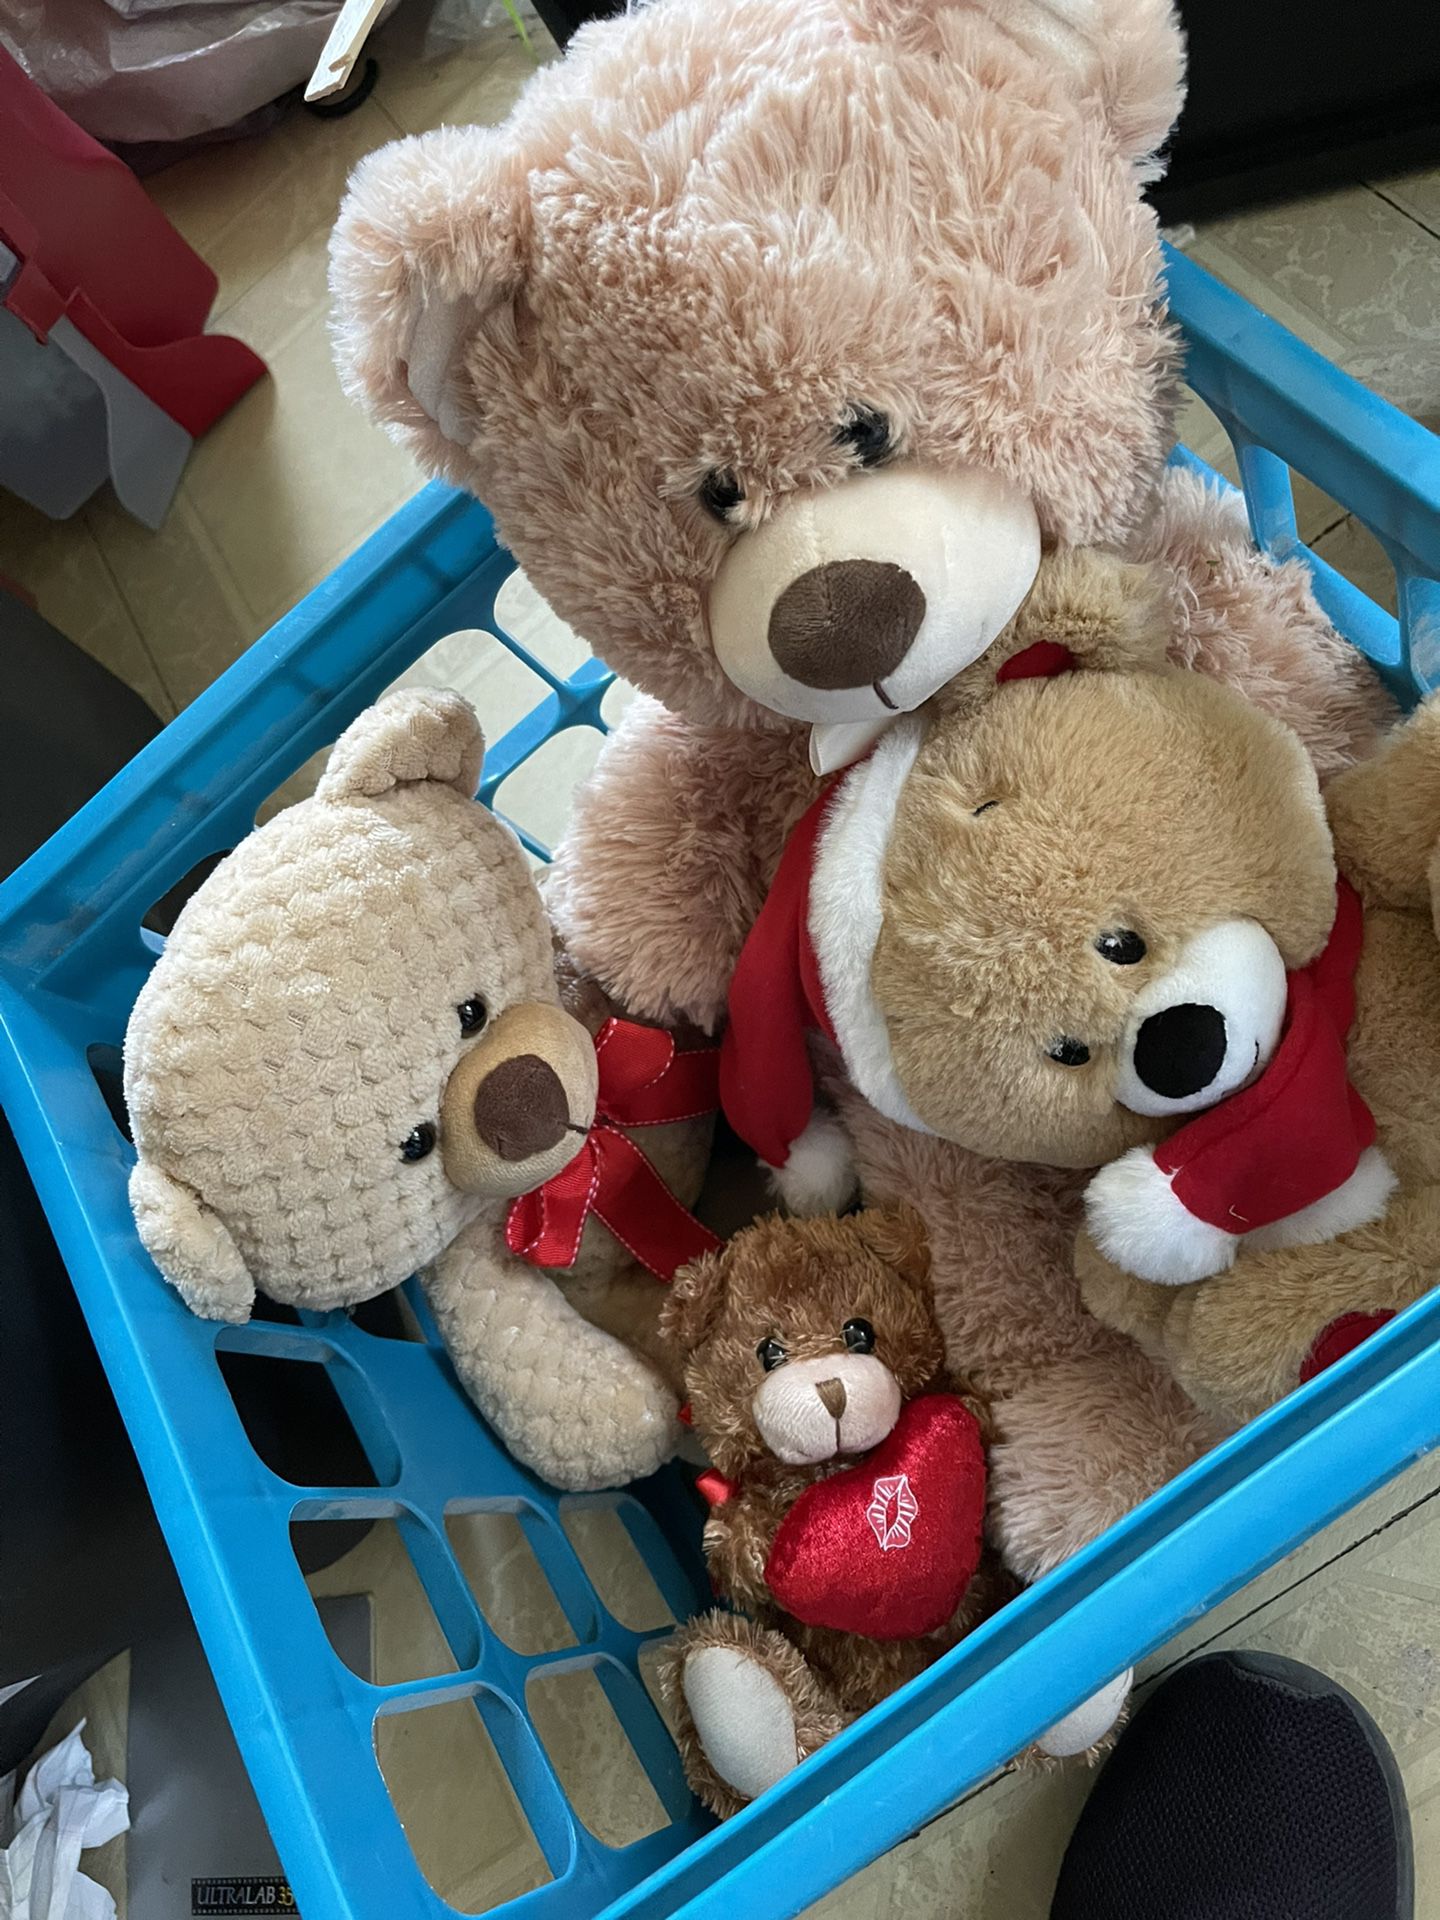  Bears Soft And Ready For A New Home 